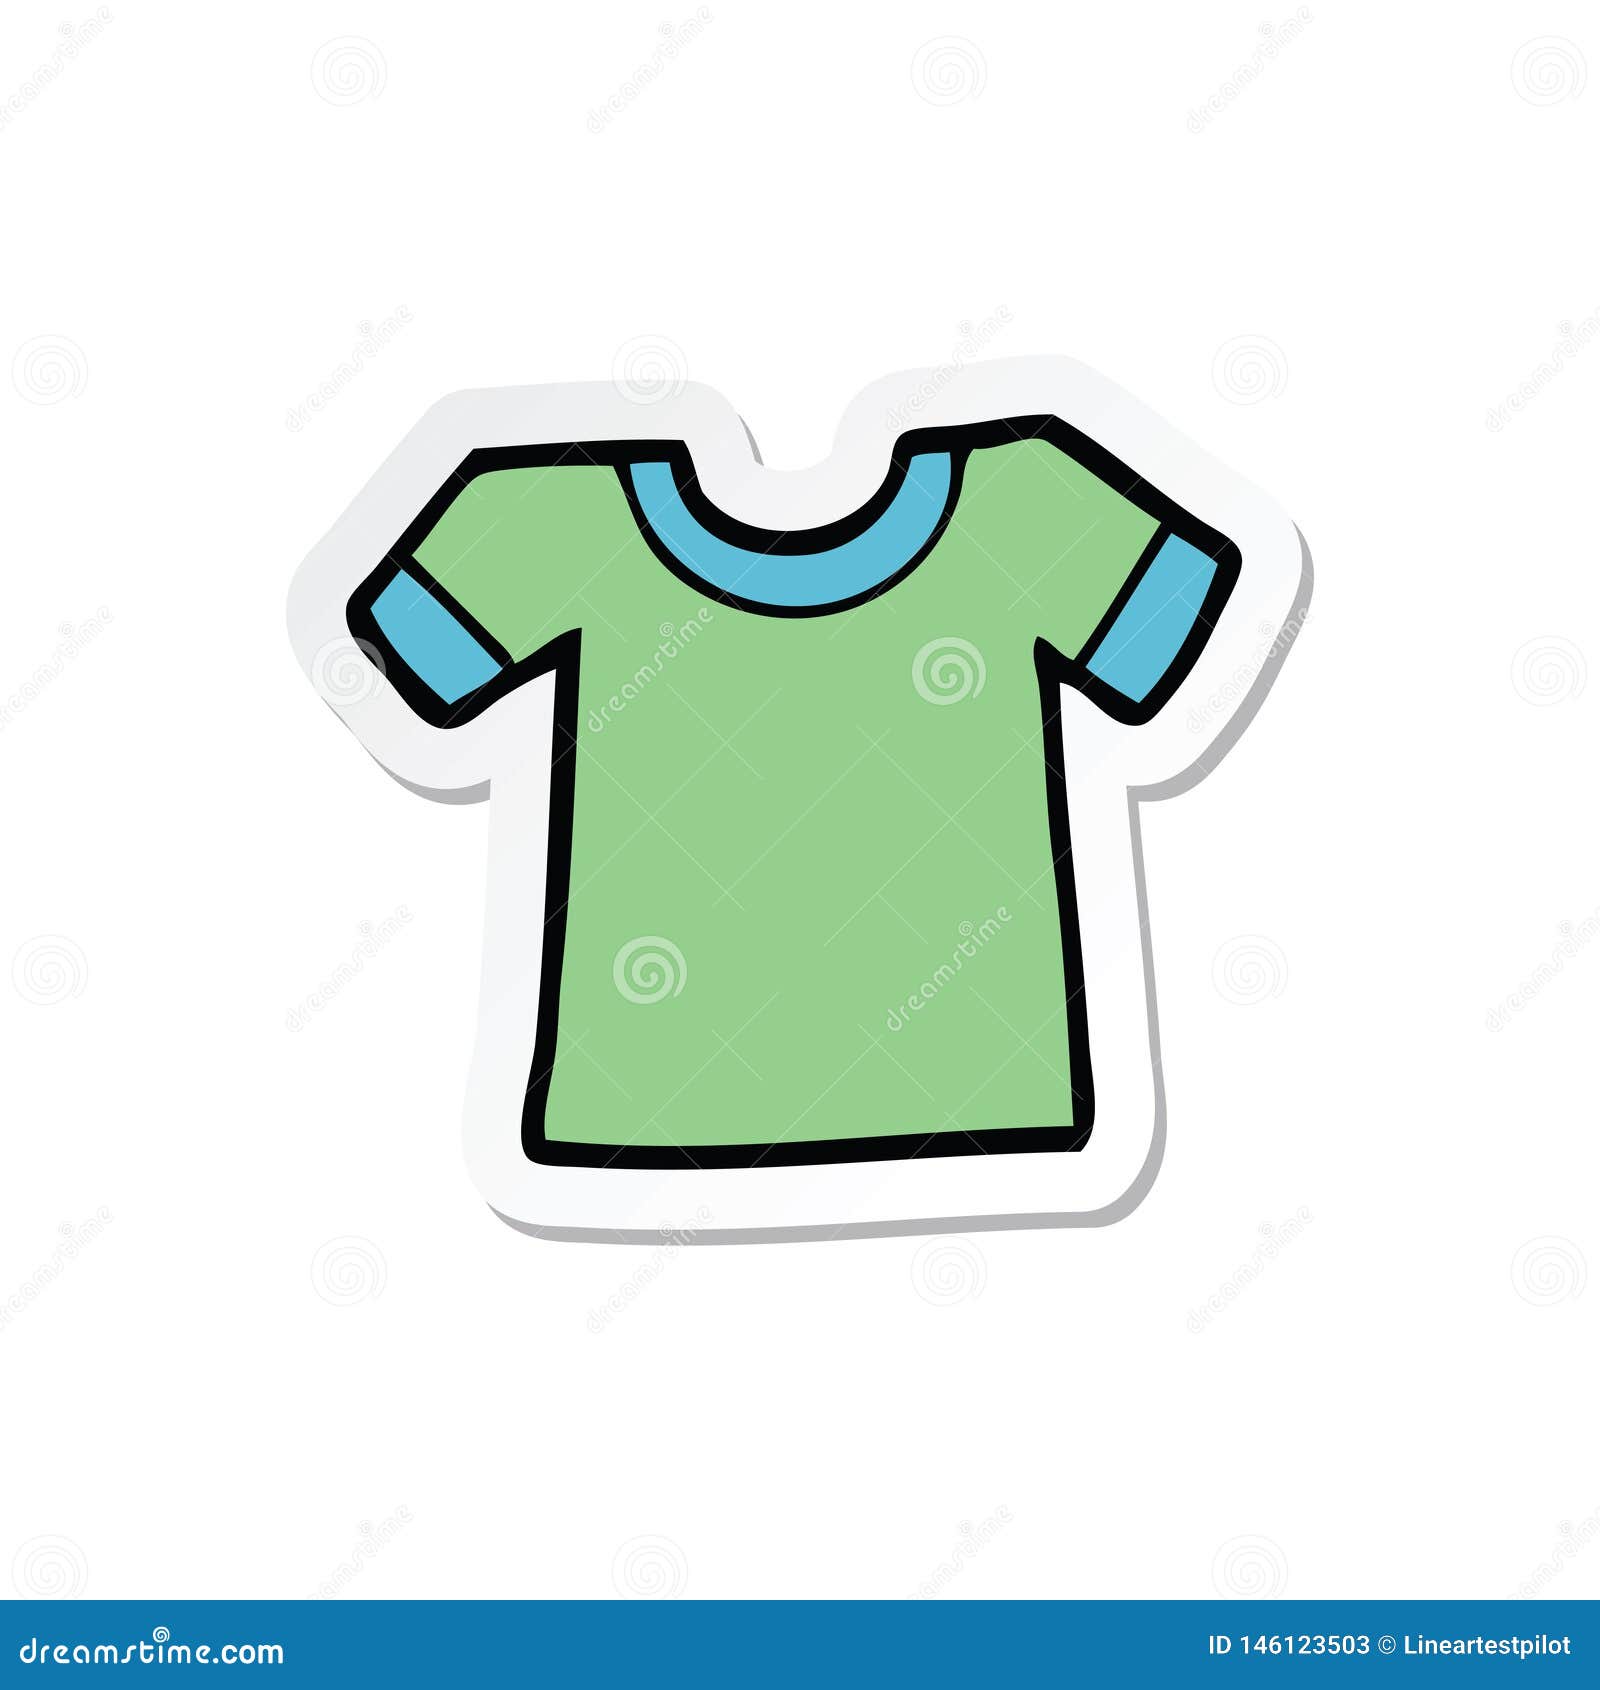 Sticker of a Cartoon Tee Shirt Stock Vector - Illustration of freehand ...